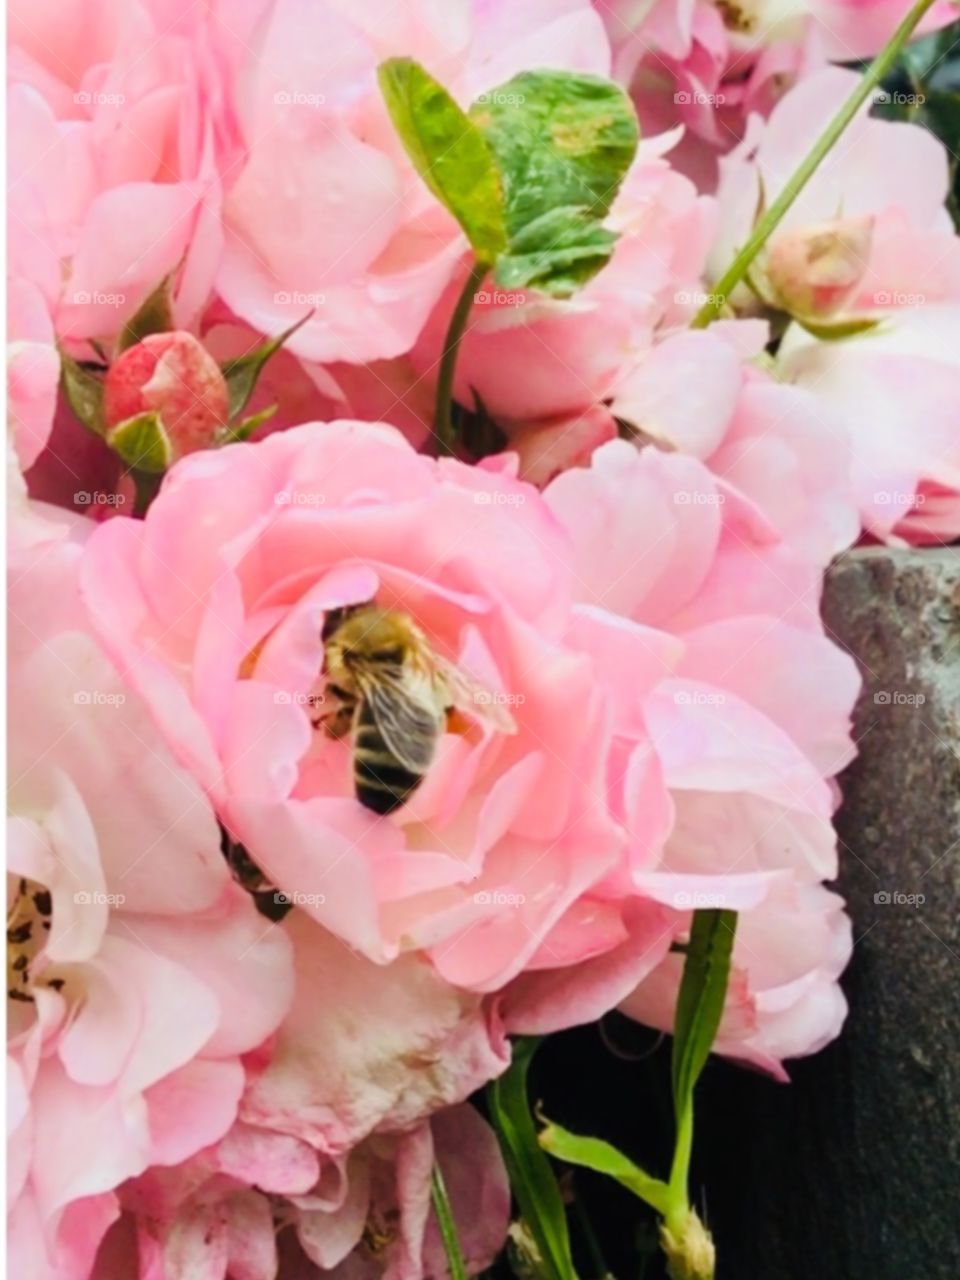 This is a photo of light pink flowers and a bee collecting pollen. There are lots of flowers in the background.